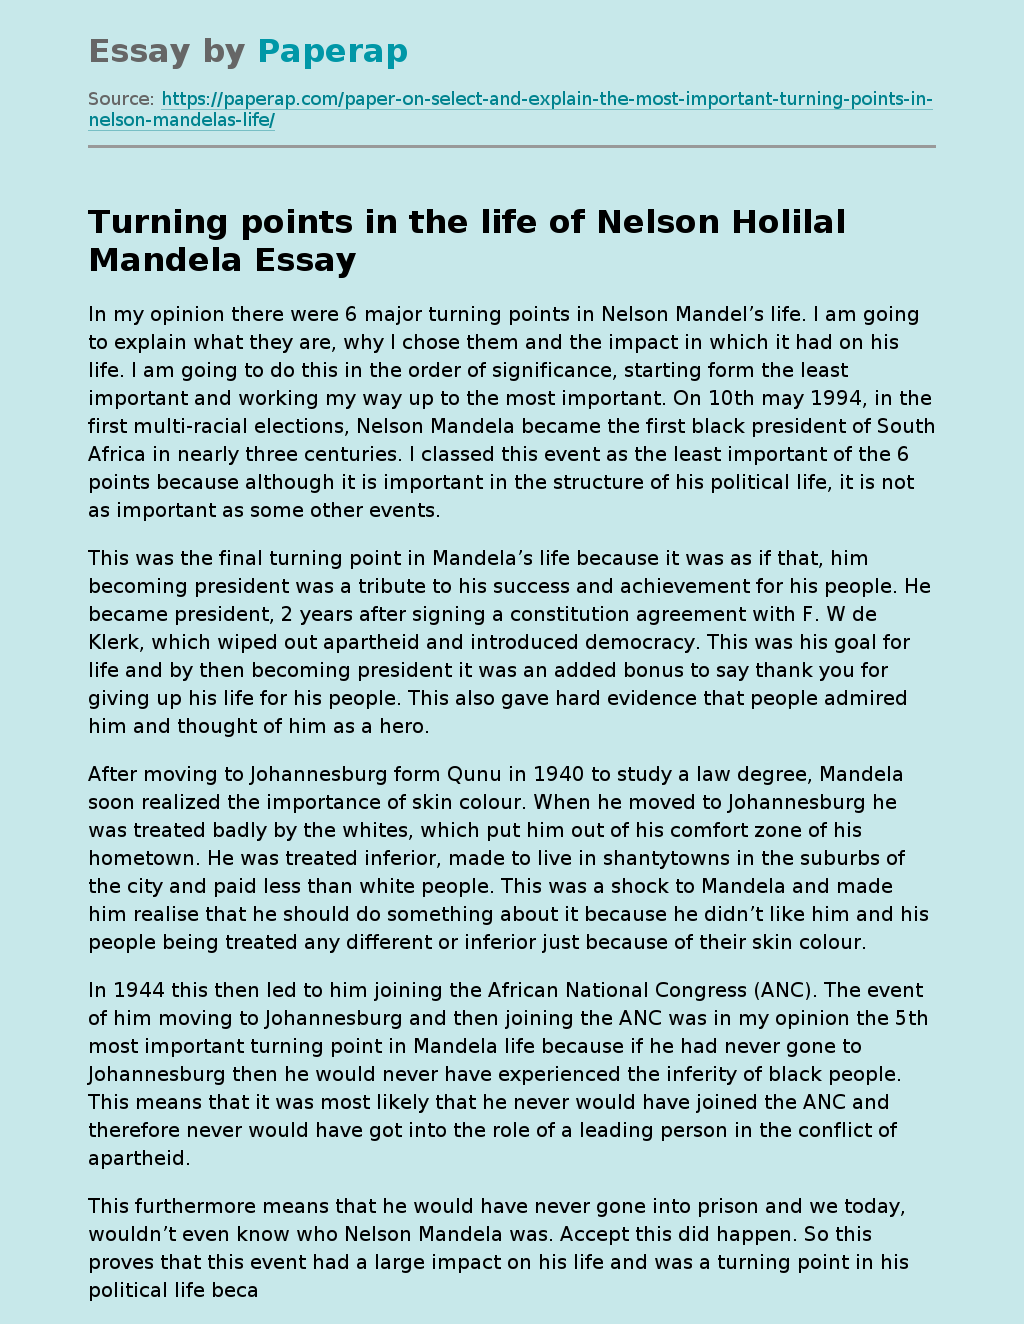 Turning points in the life of Nelson Holilal Mandela